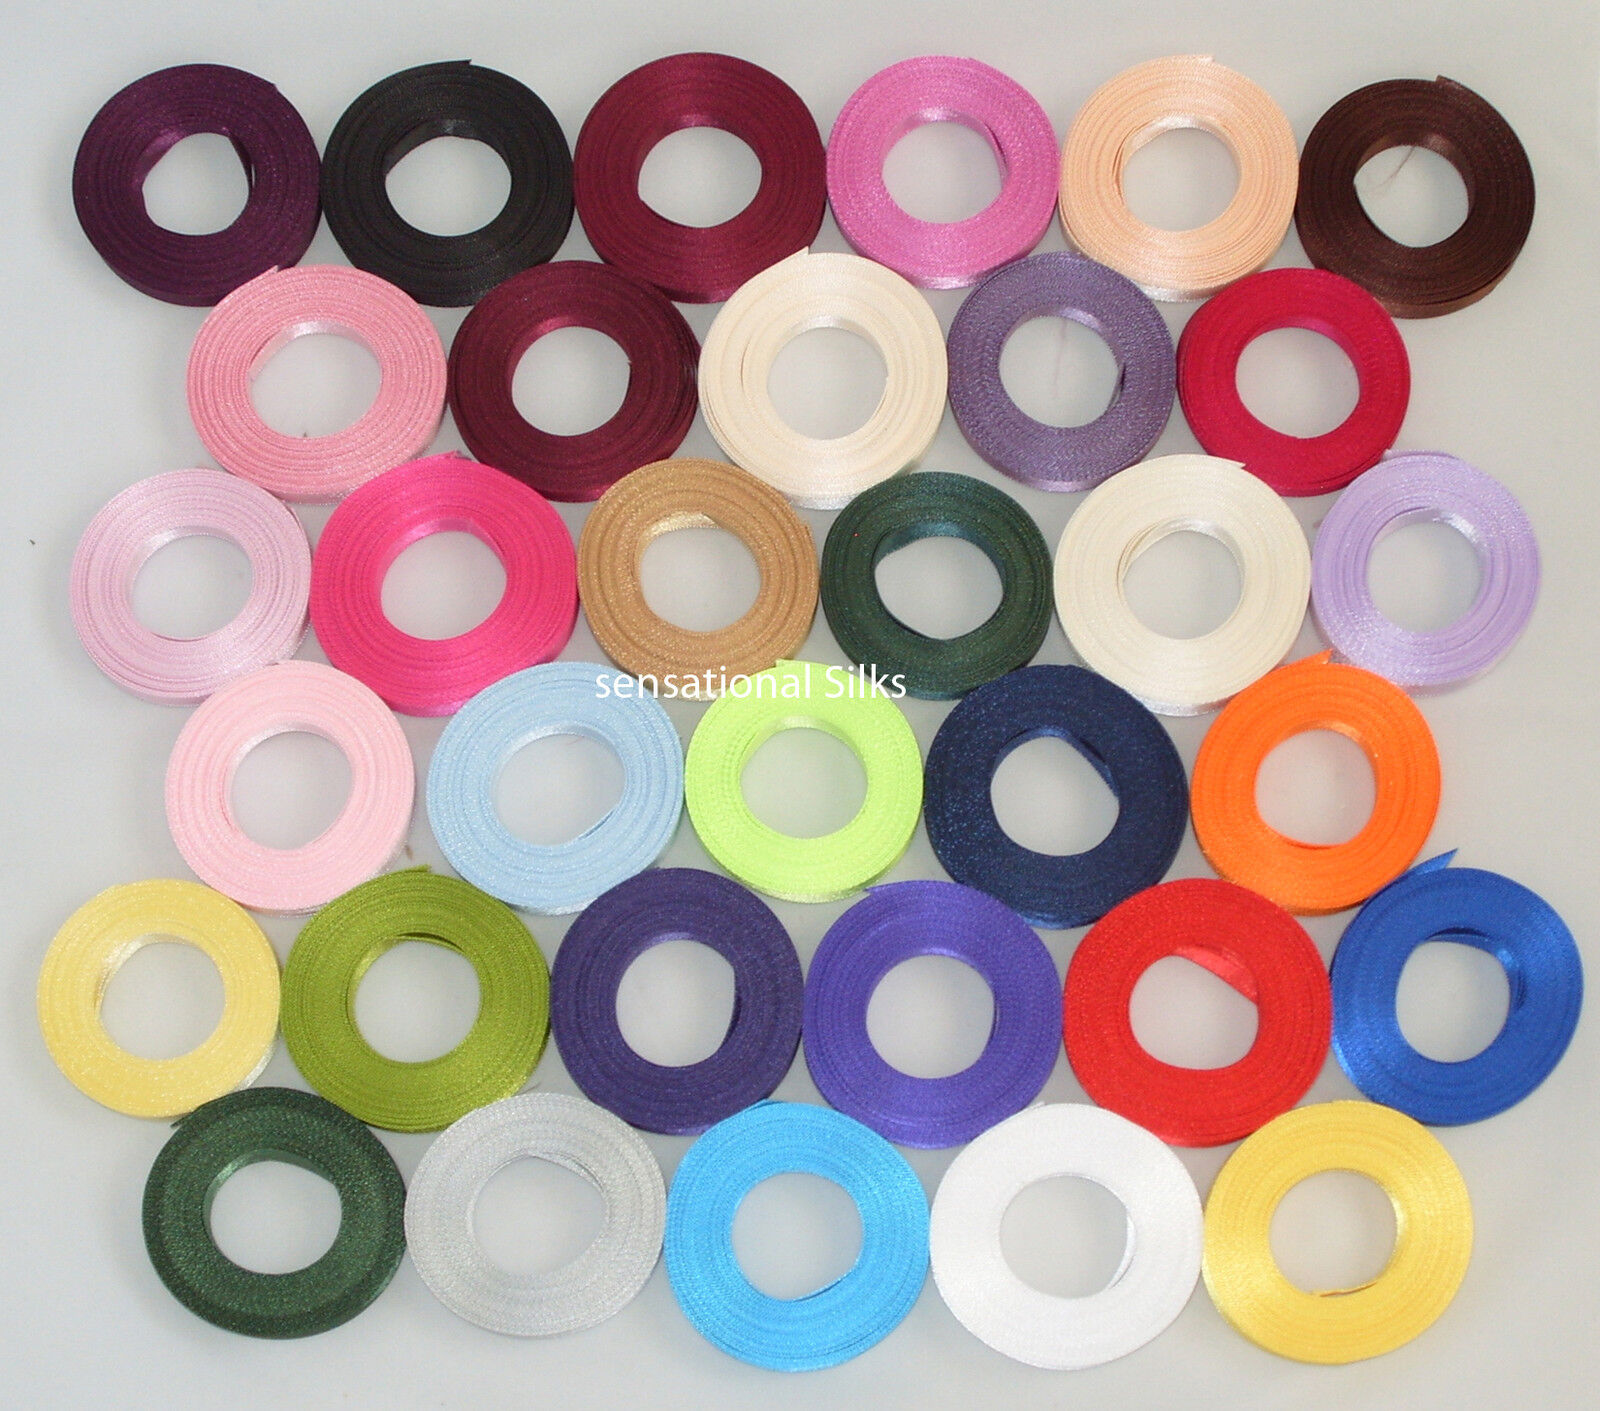 Double Sided Satin Ribbon 3mm 6mm 10mm 15mm 25mm 38mm, Buy 3 get a 4th one free